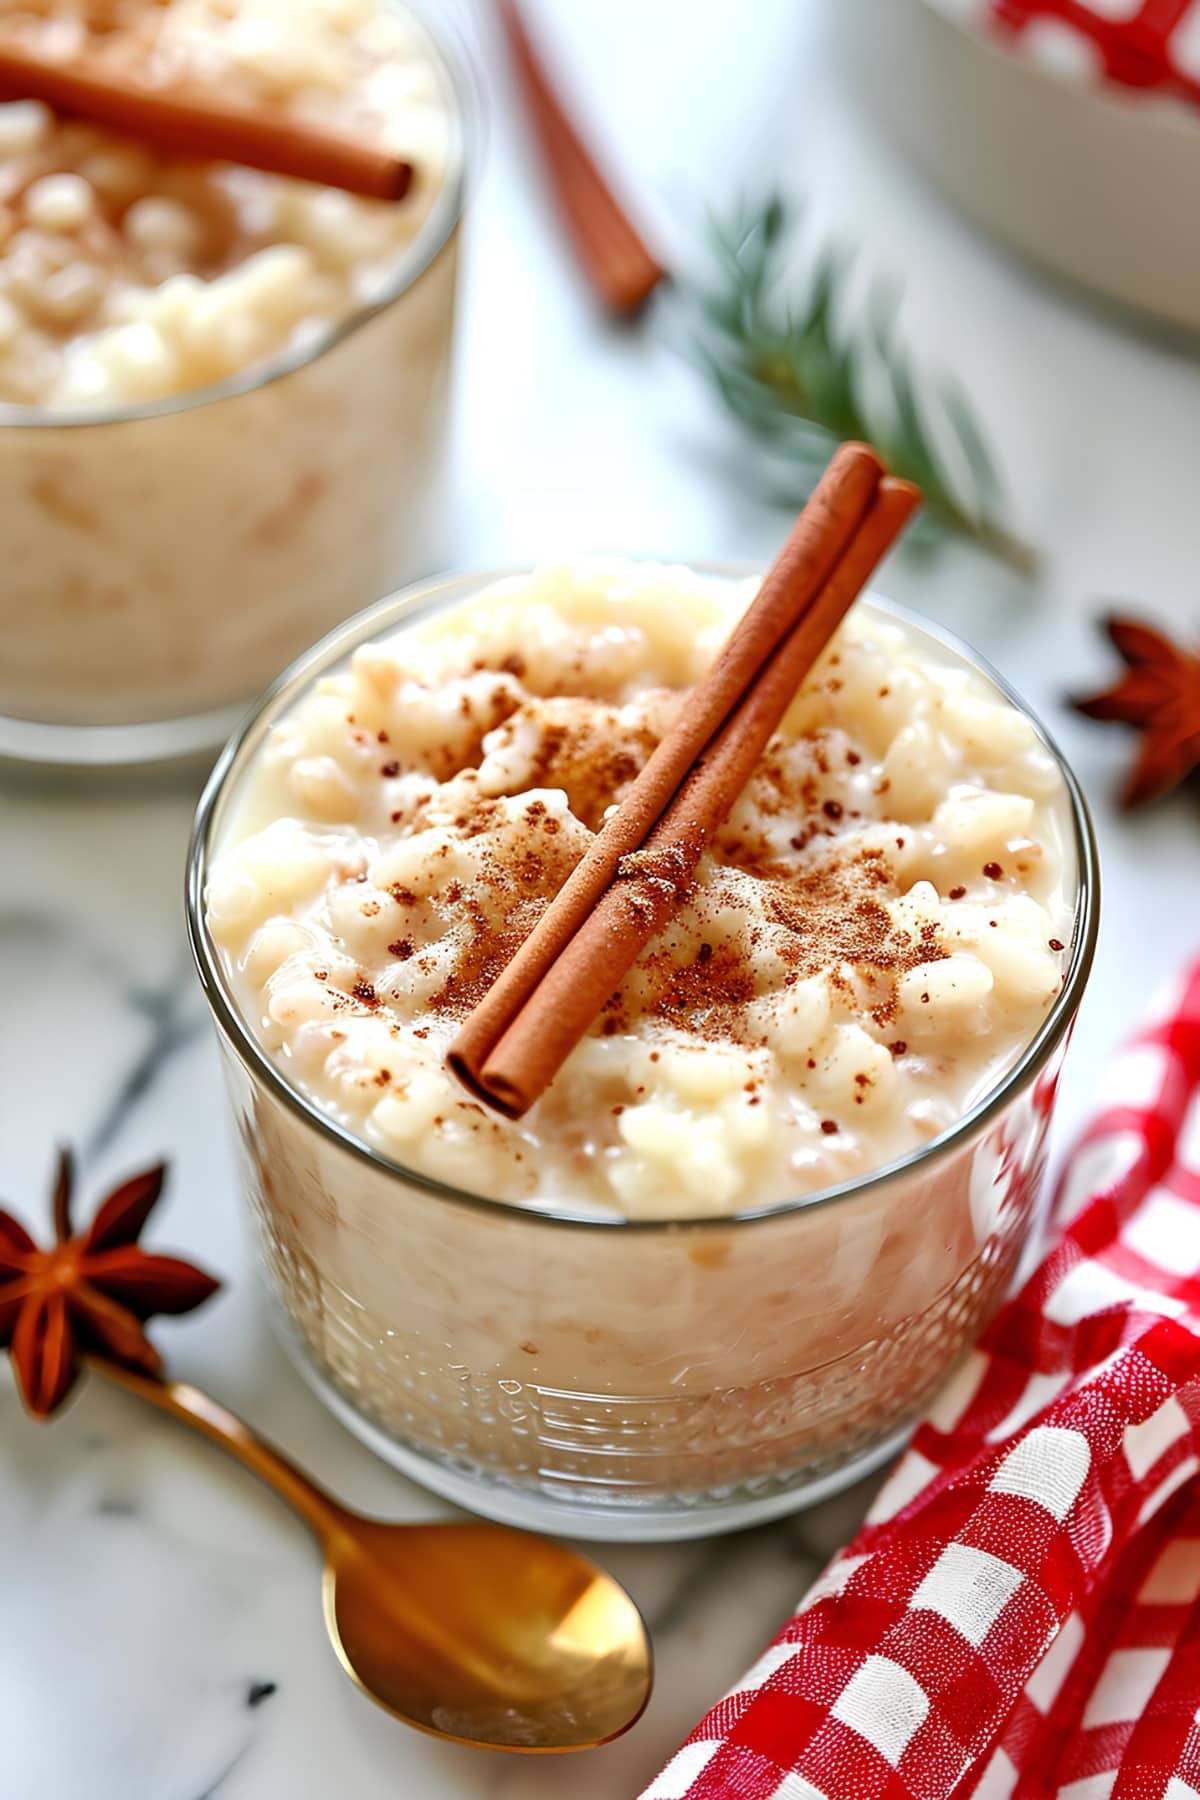 Mexican rice pudding or arroz con leche, a creamy and comforting dessert with a hint of autumn flavors